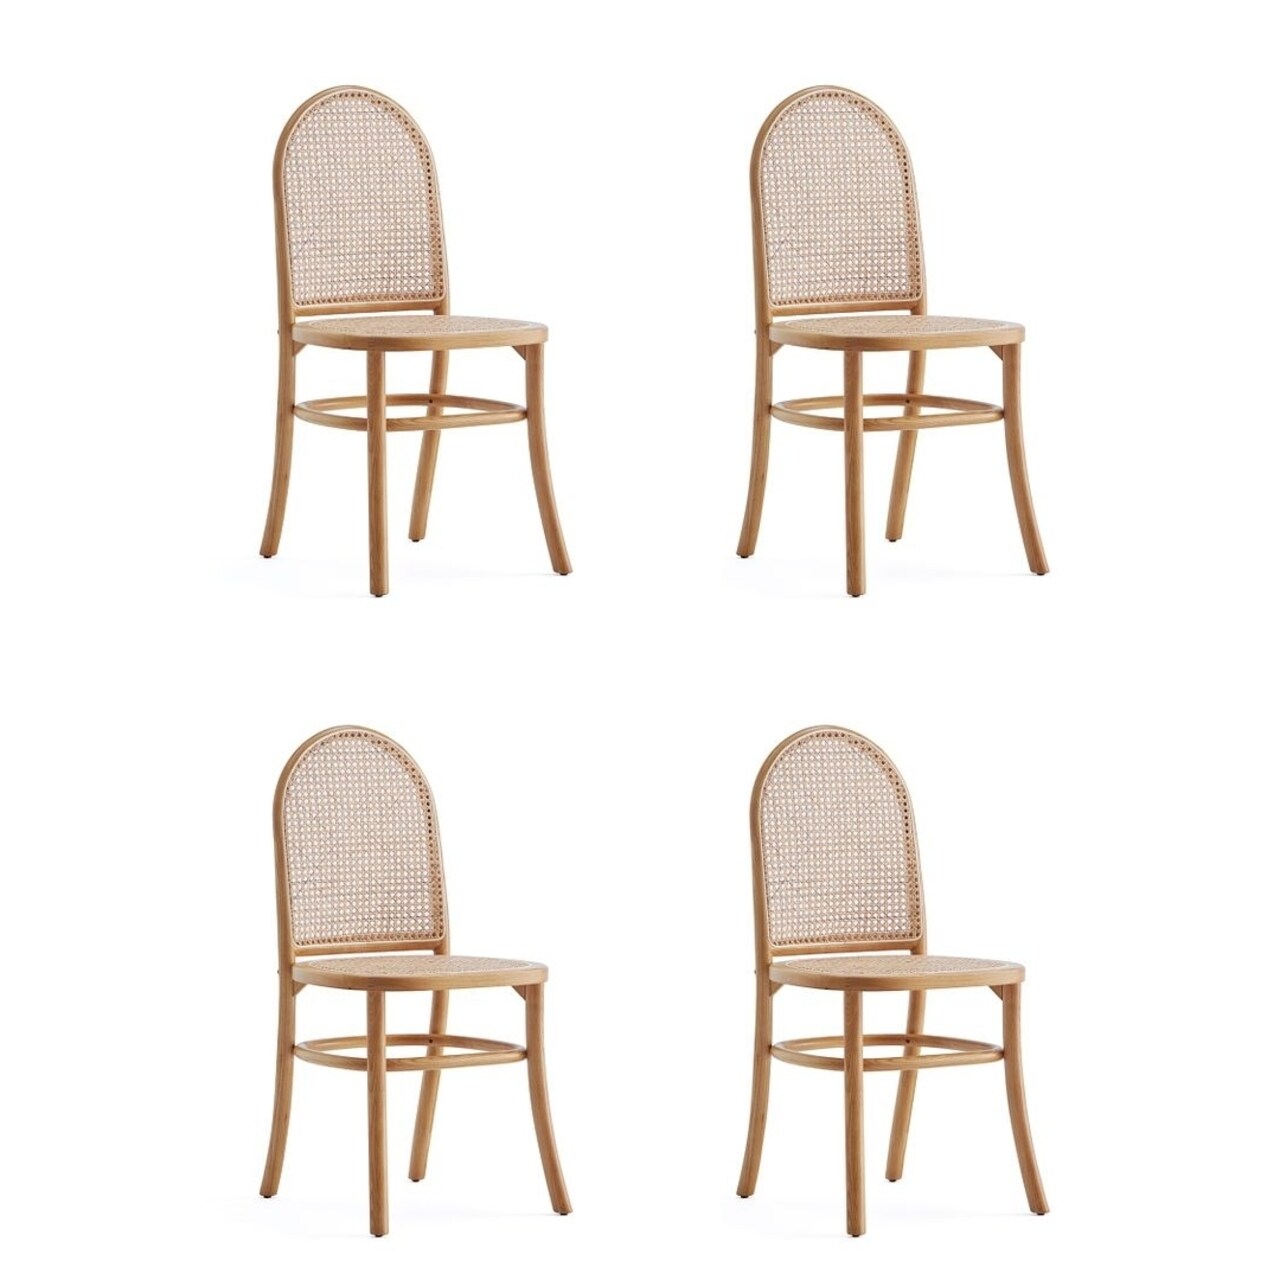 Manhattan Comfort Paragon Dining Chair 2.0 and Cane - Set of 4